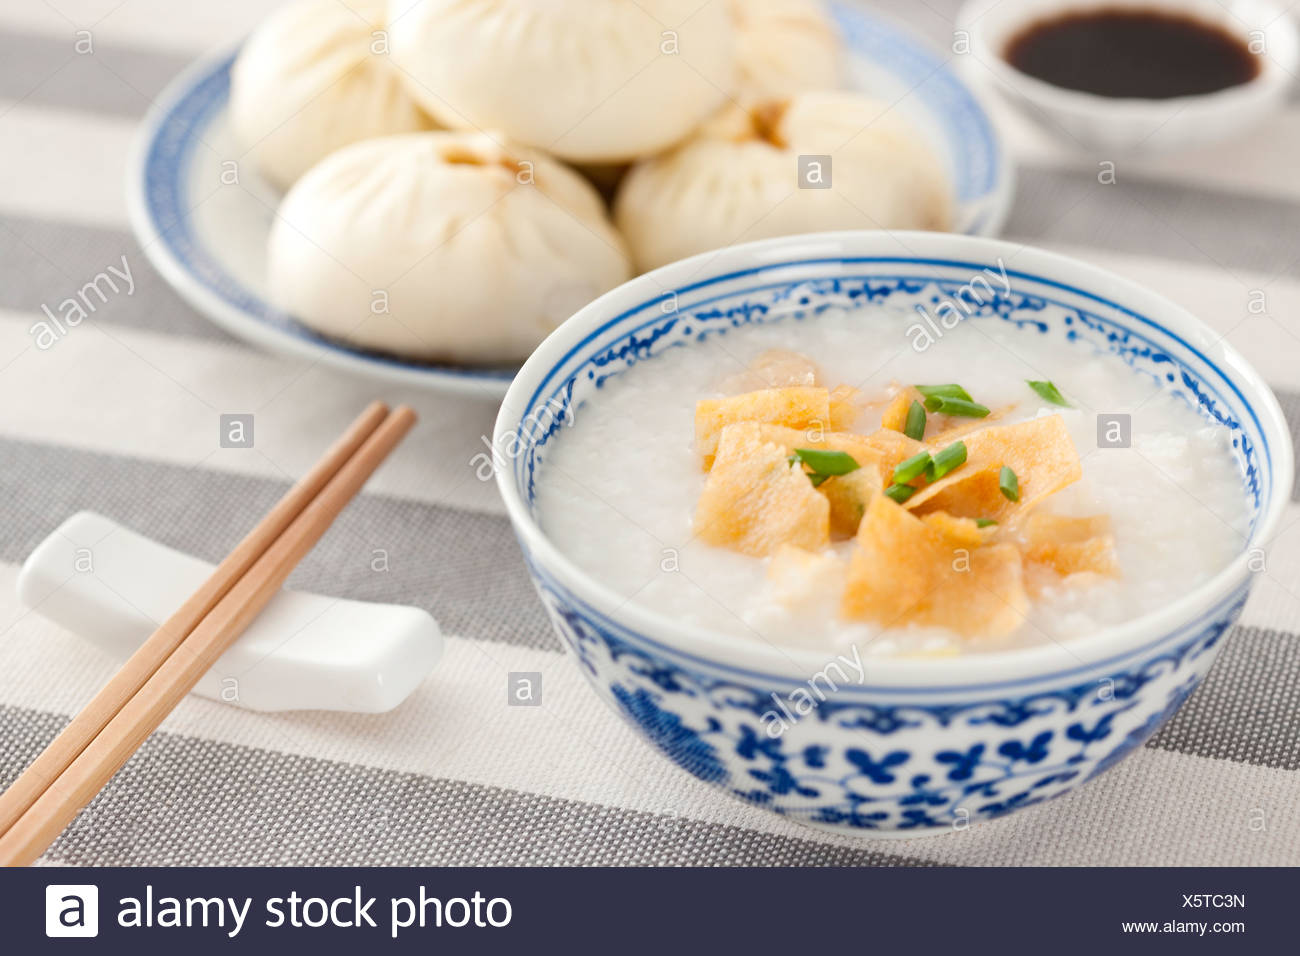 Chinese Food Rice Porridge And Steamed Buns Stock Photo Alamy,Safflower Seeds In Hindi